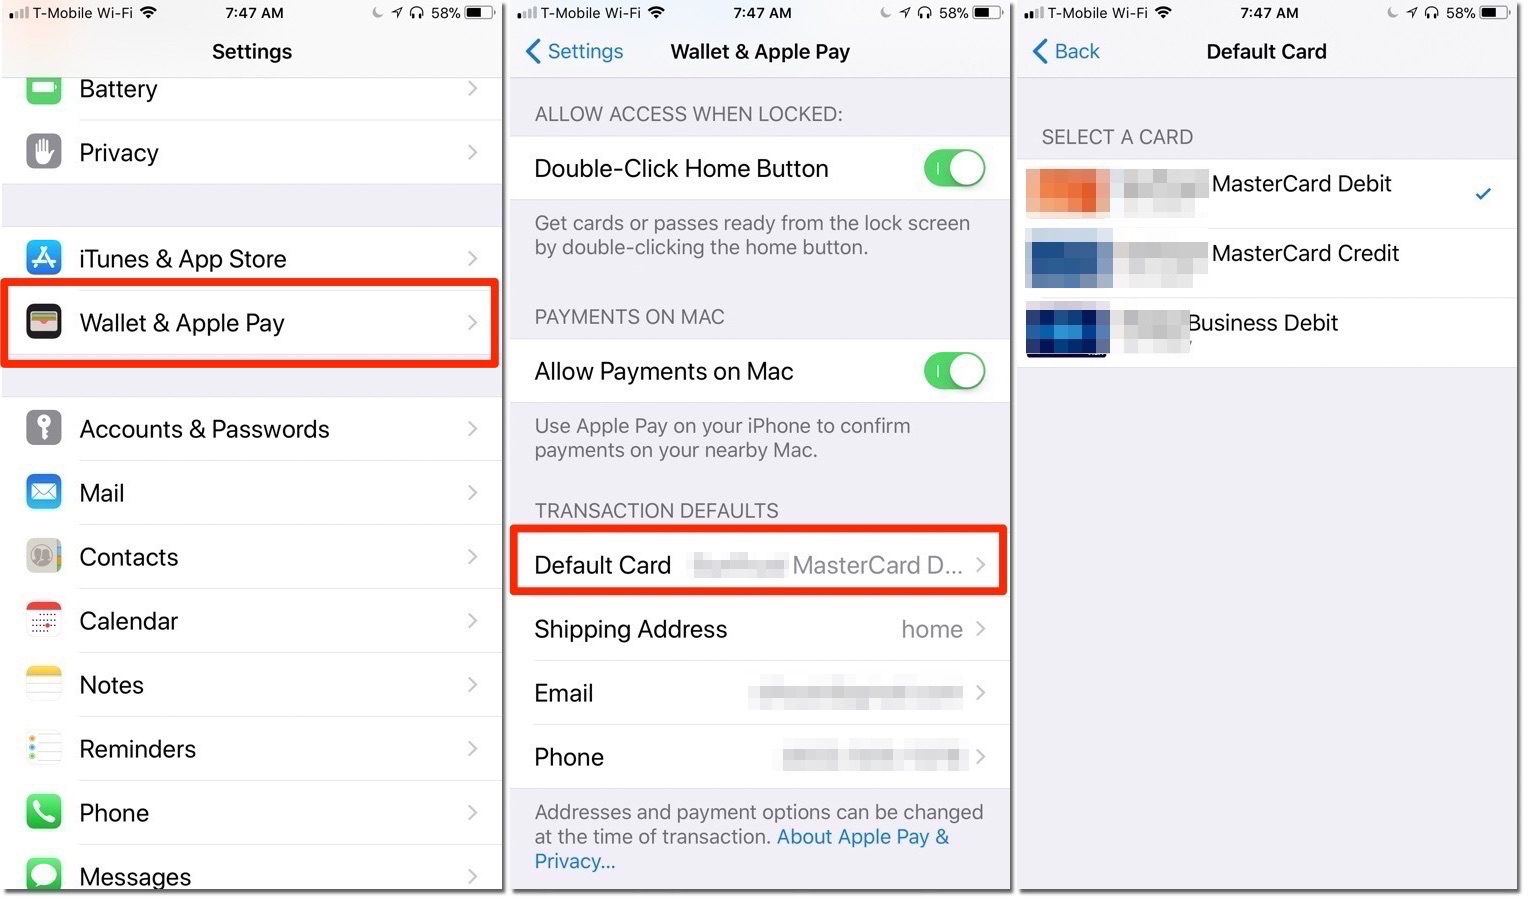 How to Change the Default Card Your iPhone Uses for Apple Pay